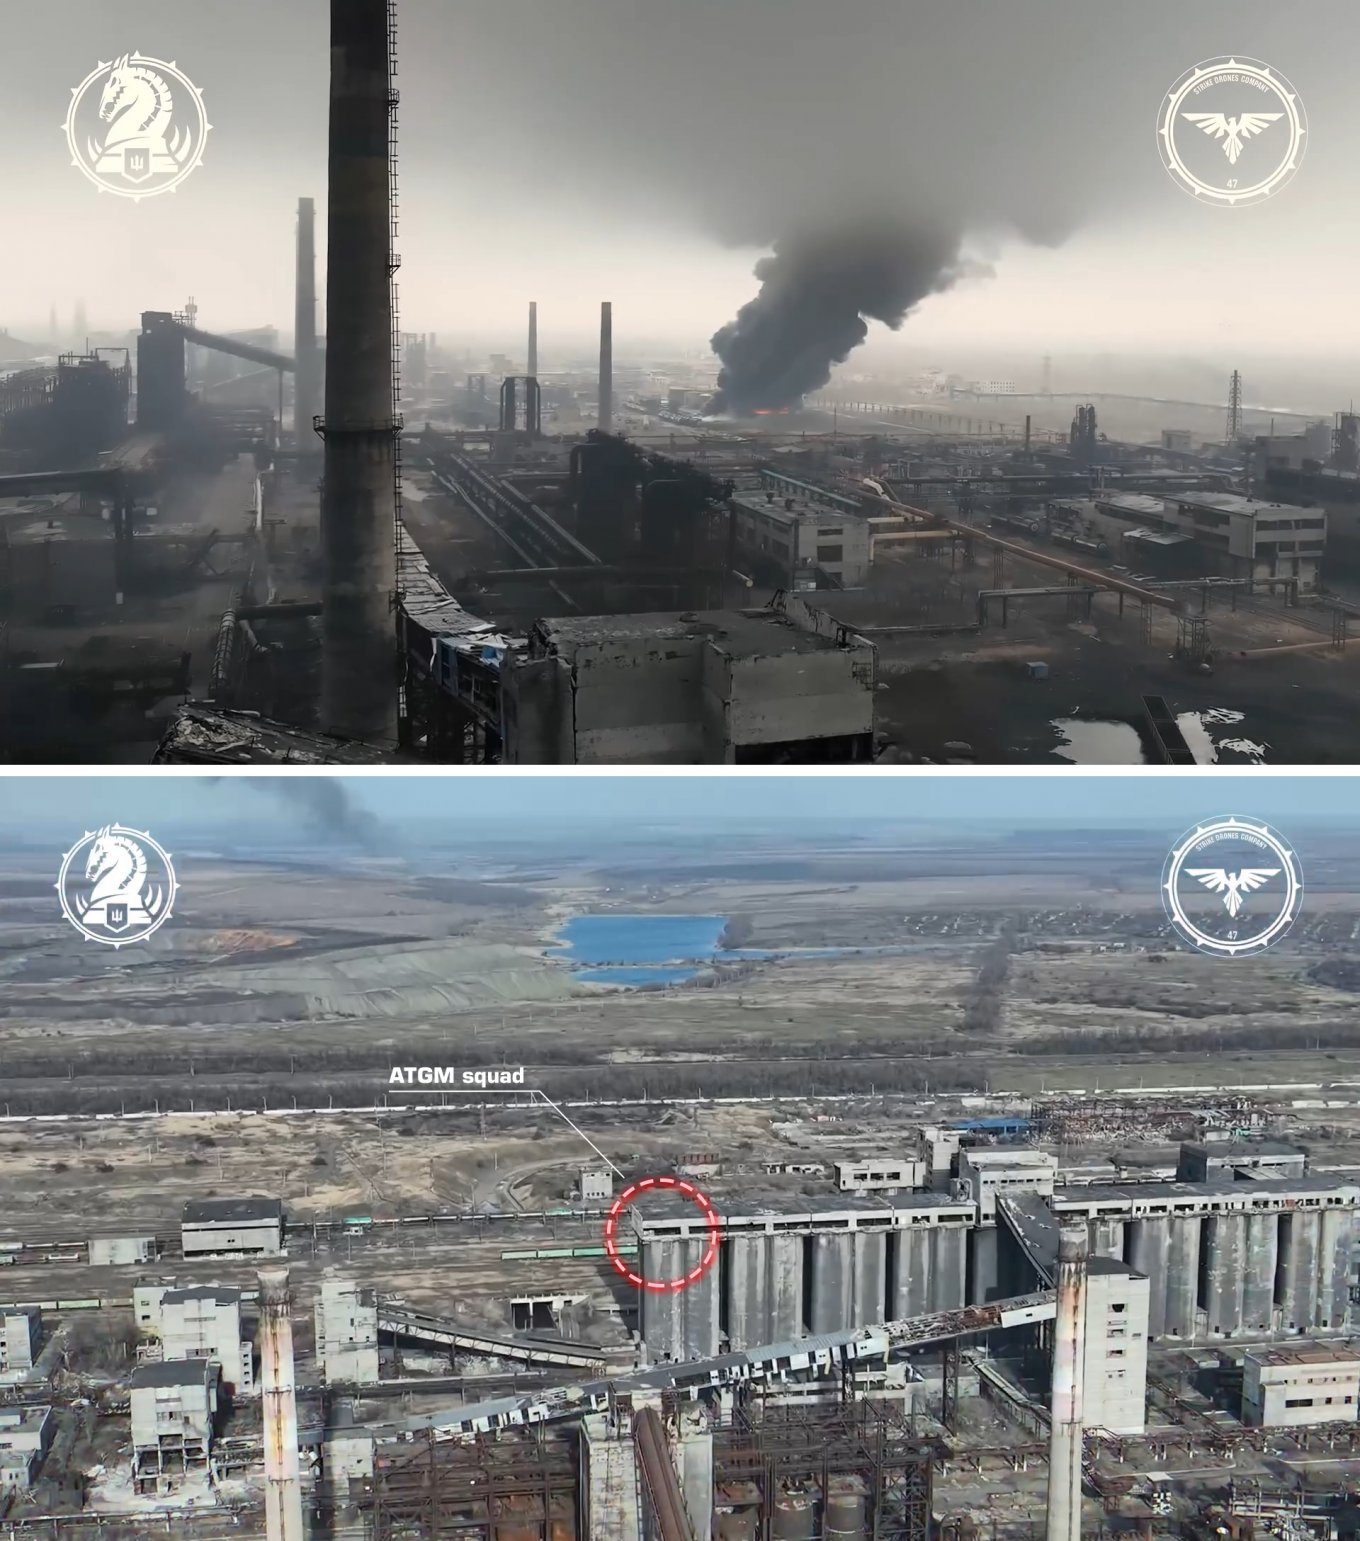 Avdiivka Coke Plant: general view and one of positions of russian anti-tank units / Defense Express / How Ukrainian Forces Use M1 Abrams Tanks Near Avdiivka, Insights from Soldier and Analyst